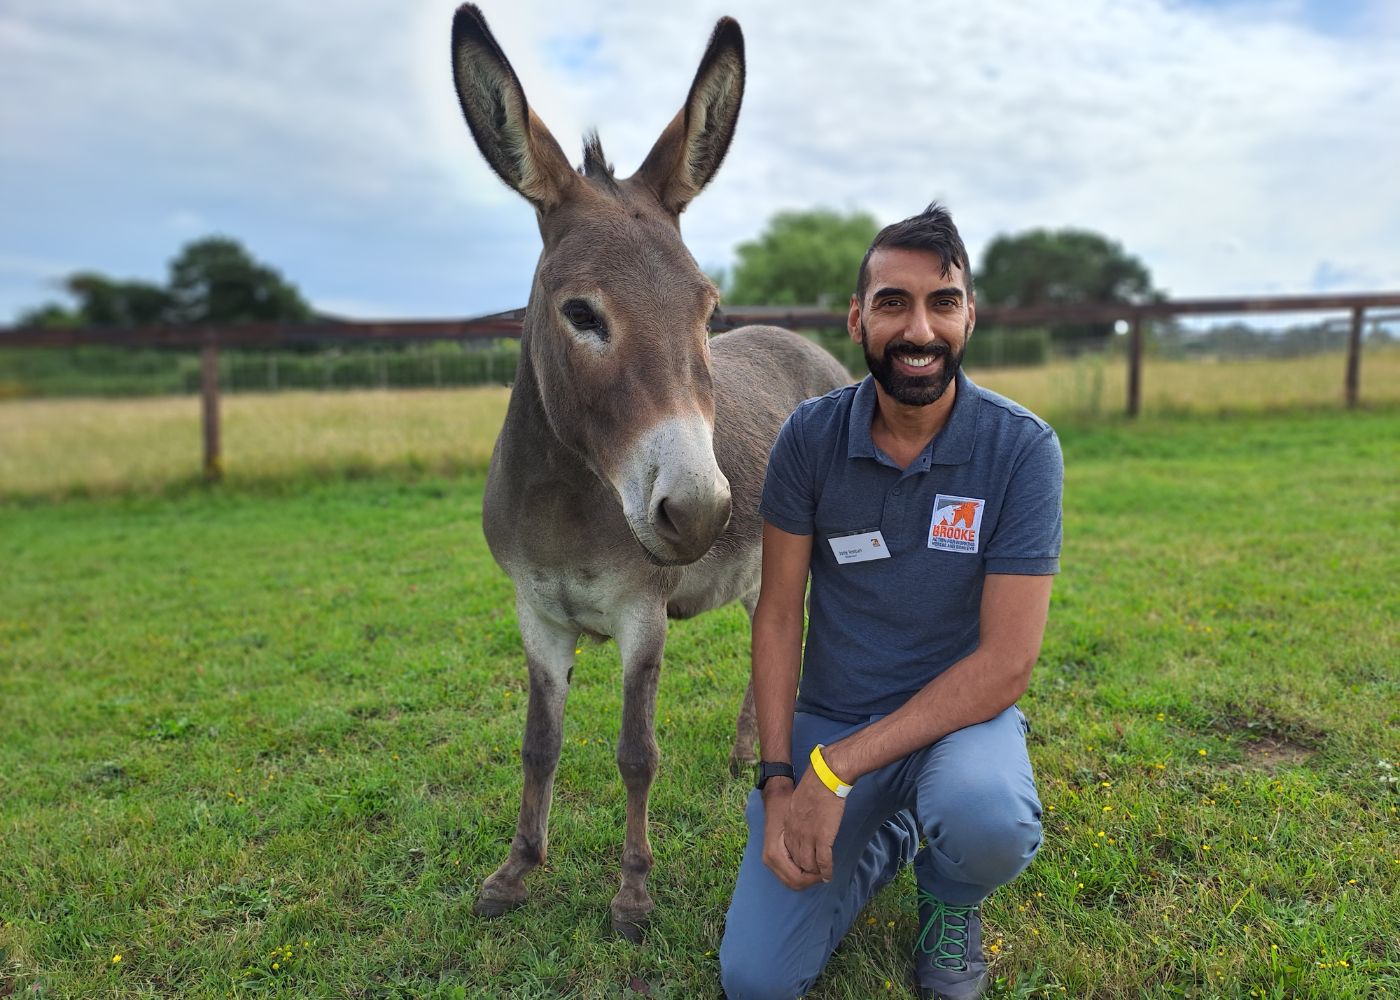 A man and a donkey